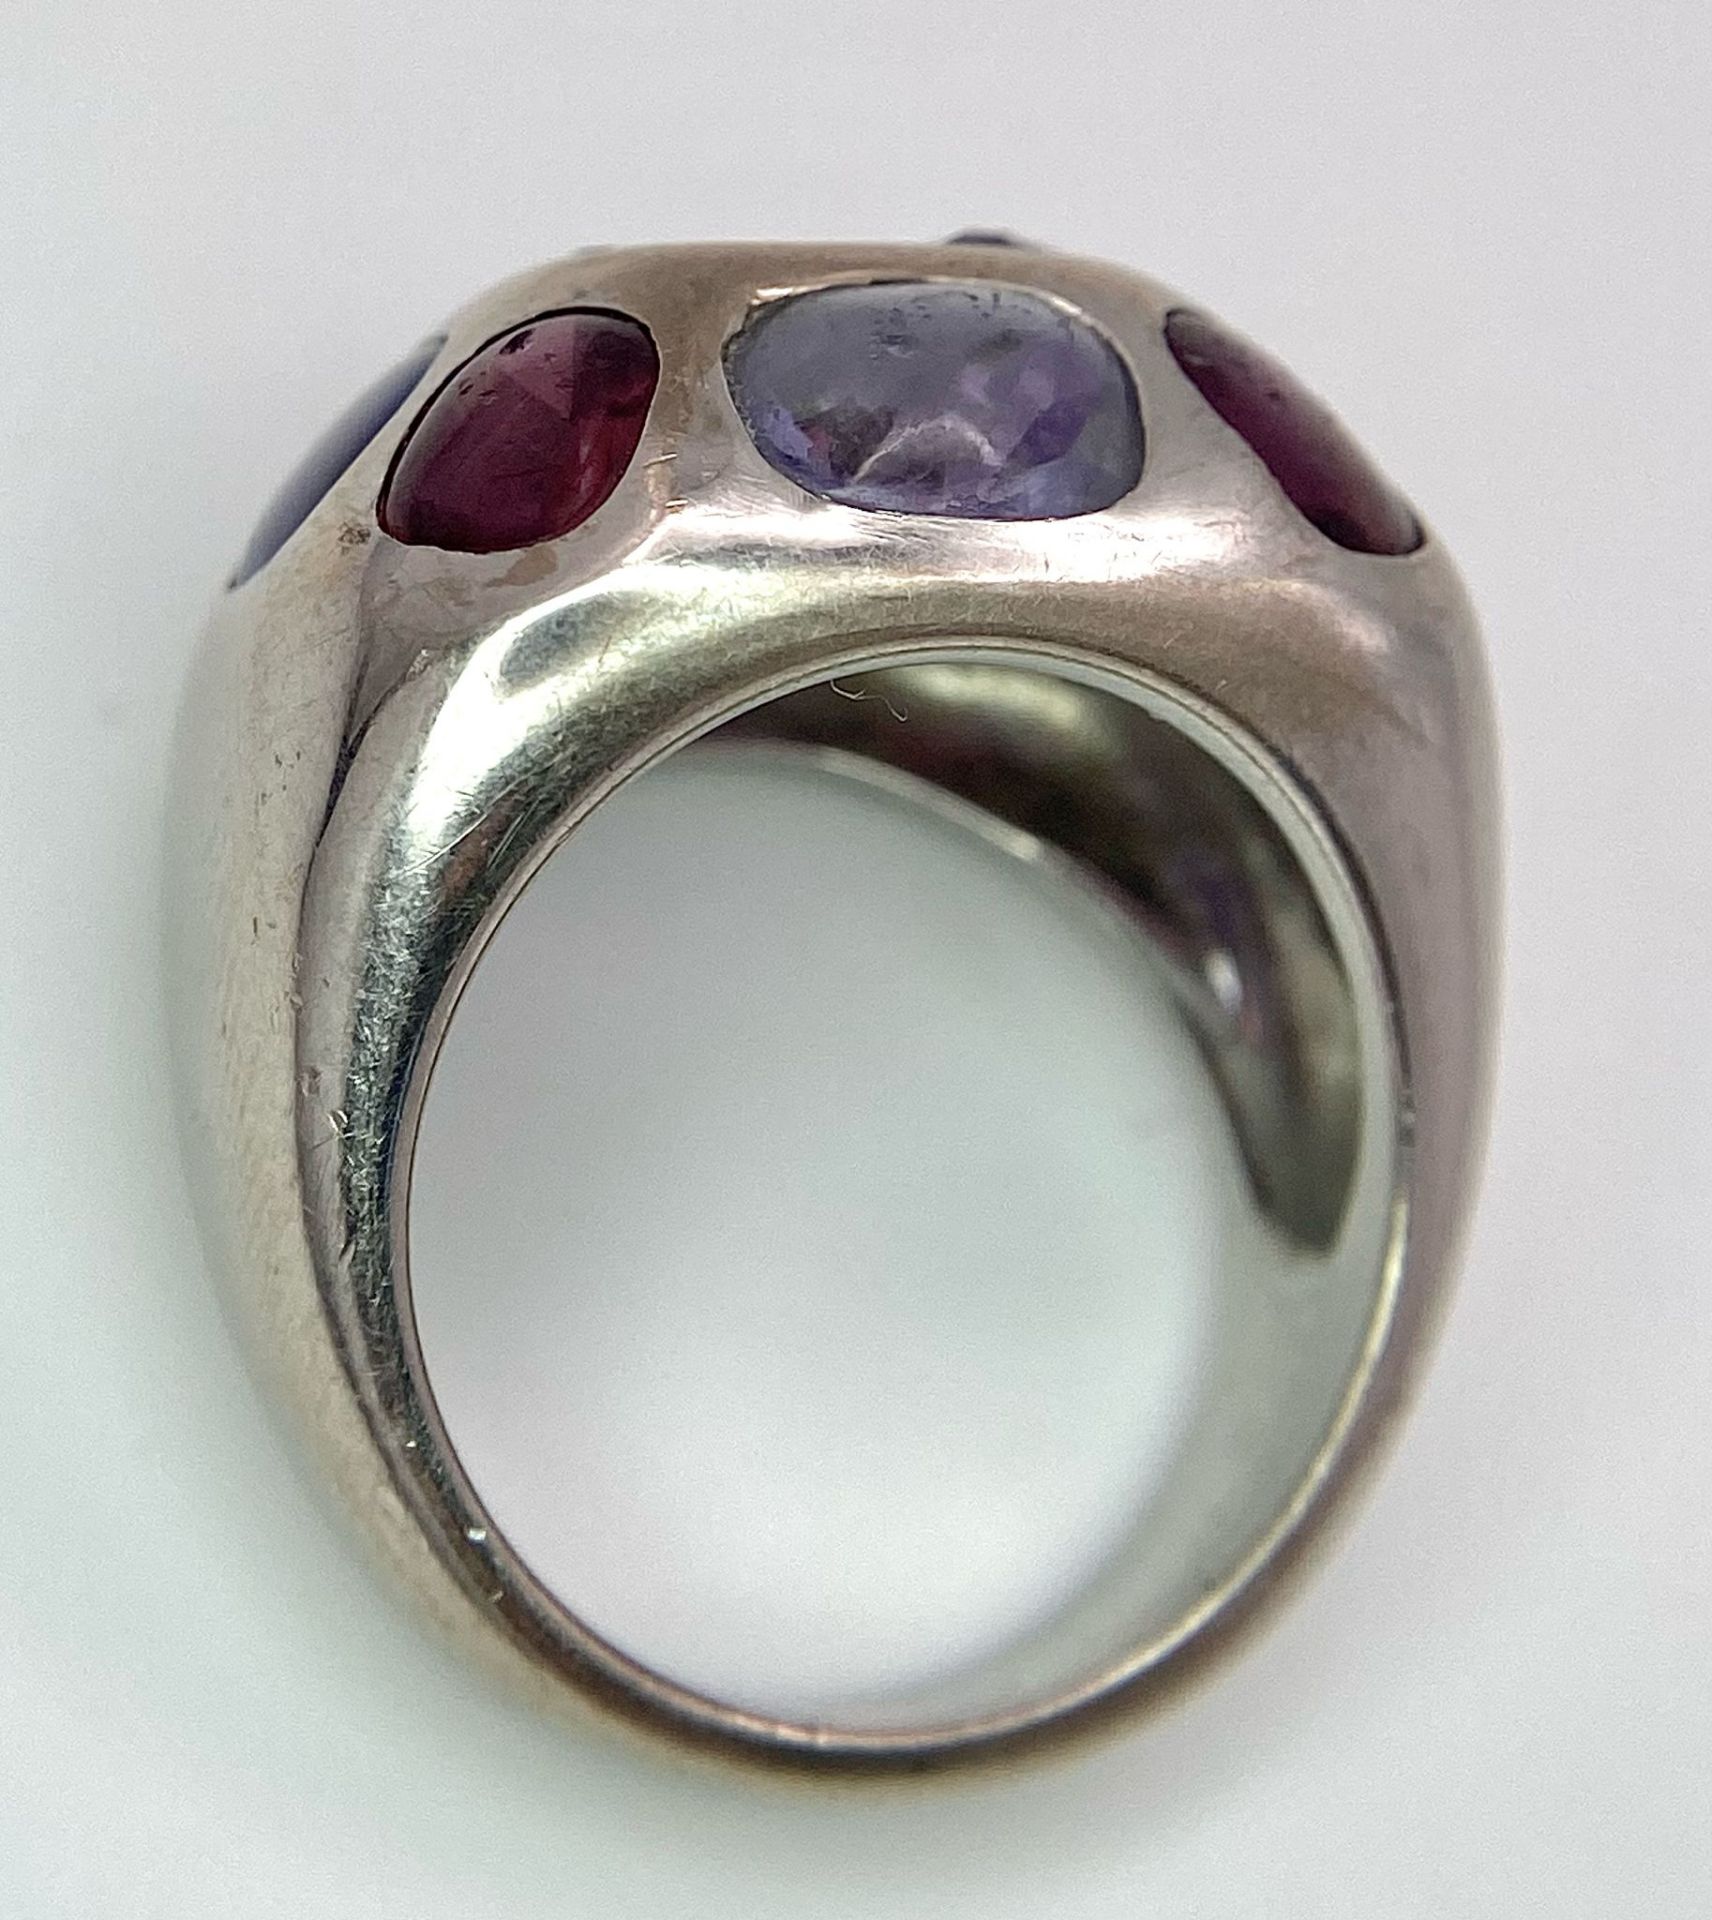 A Chanel Designer 18K White Gold and Amethyst and Garnet Ring. Rectangular cut central amethyst with - Image 10 of 13